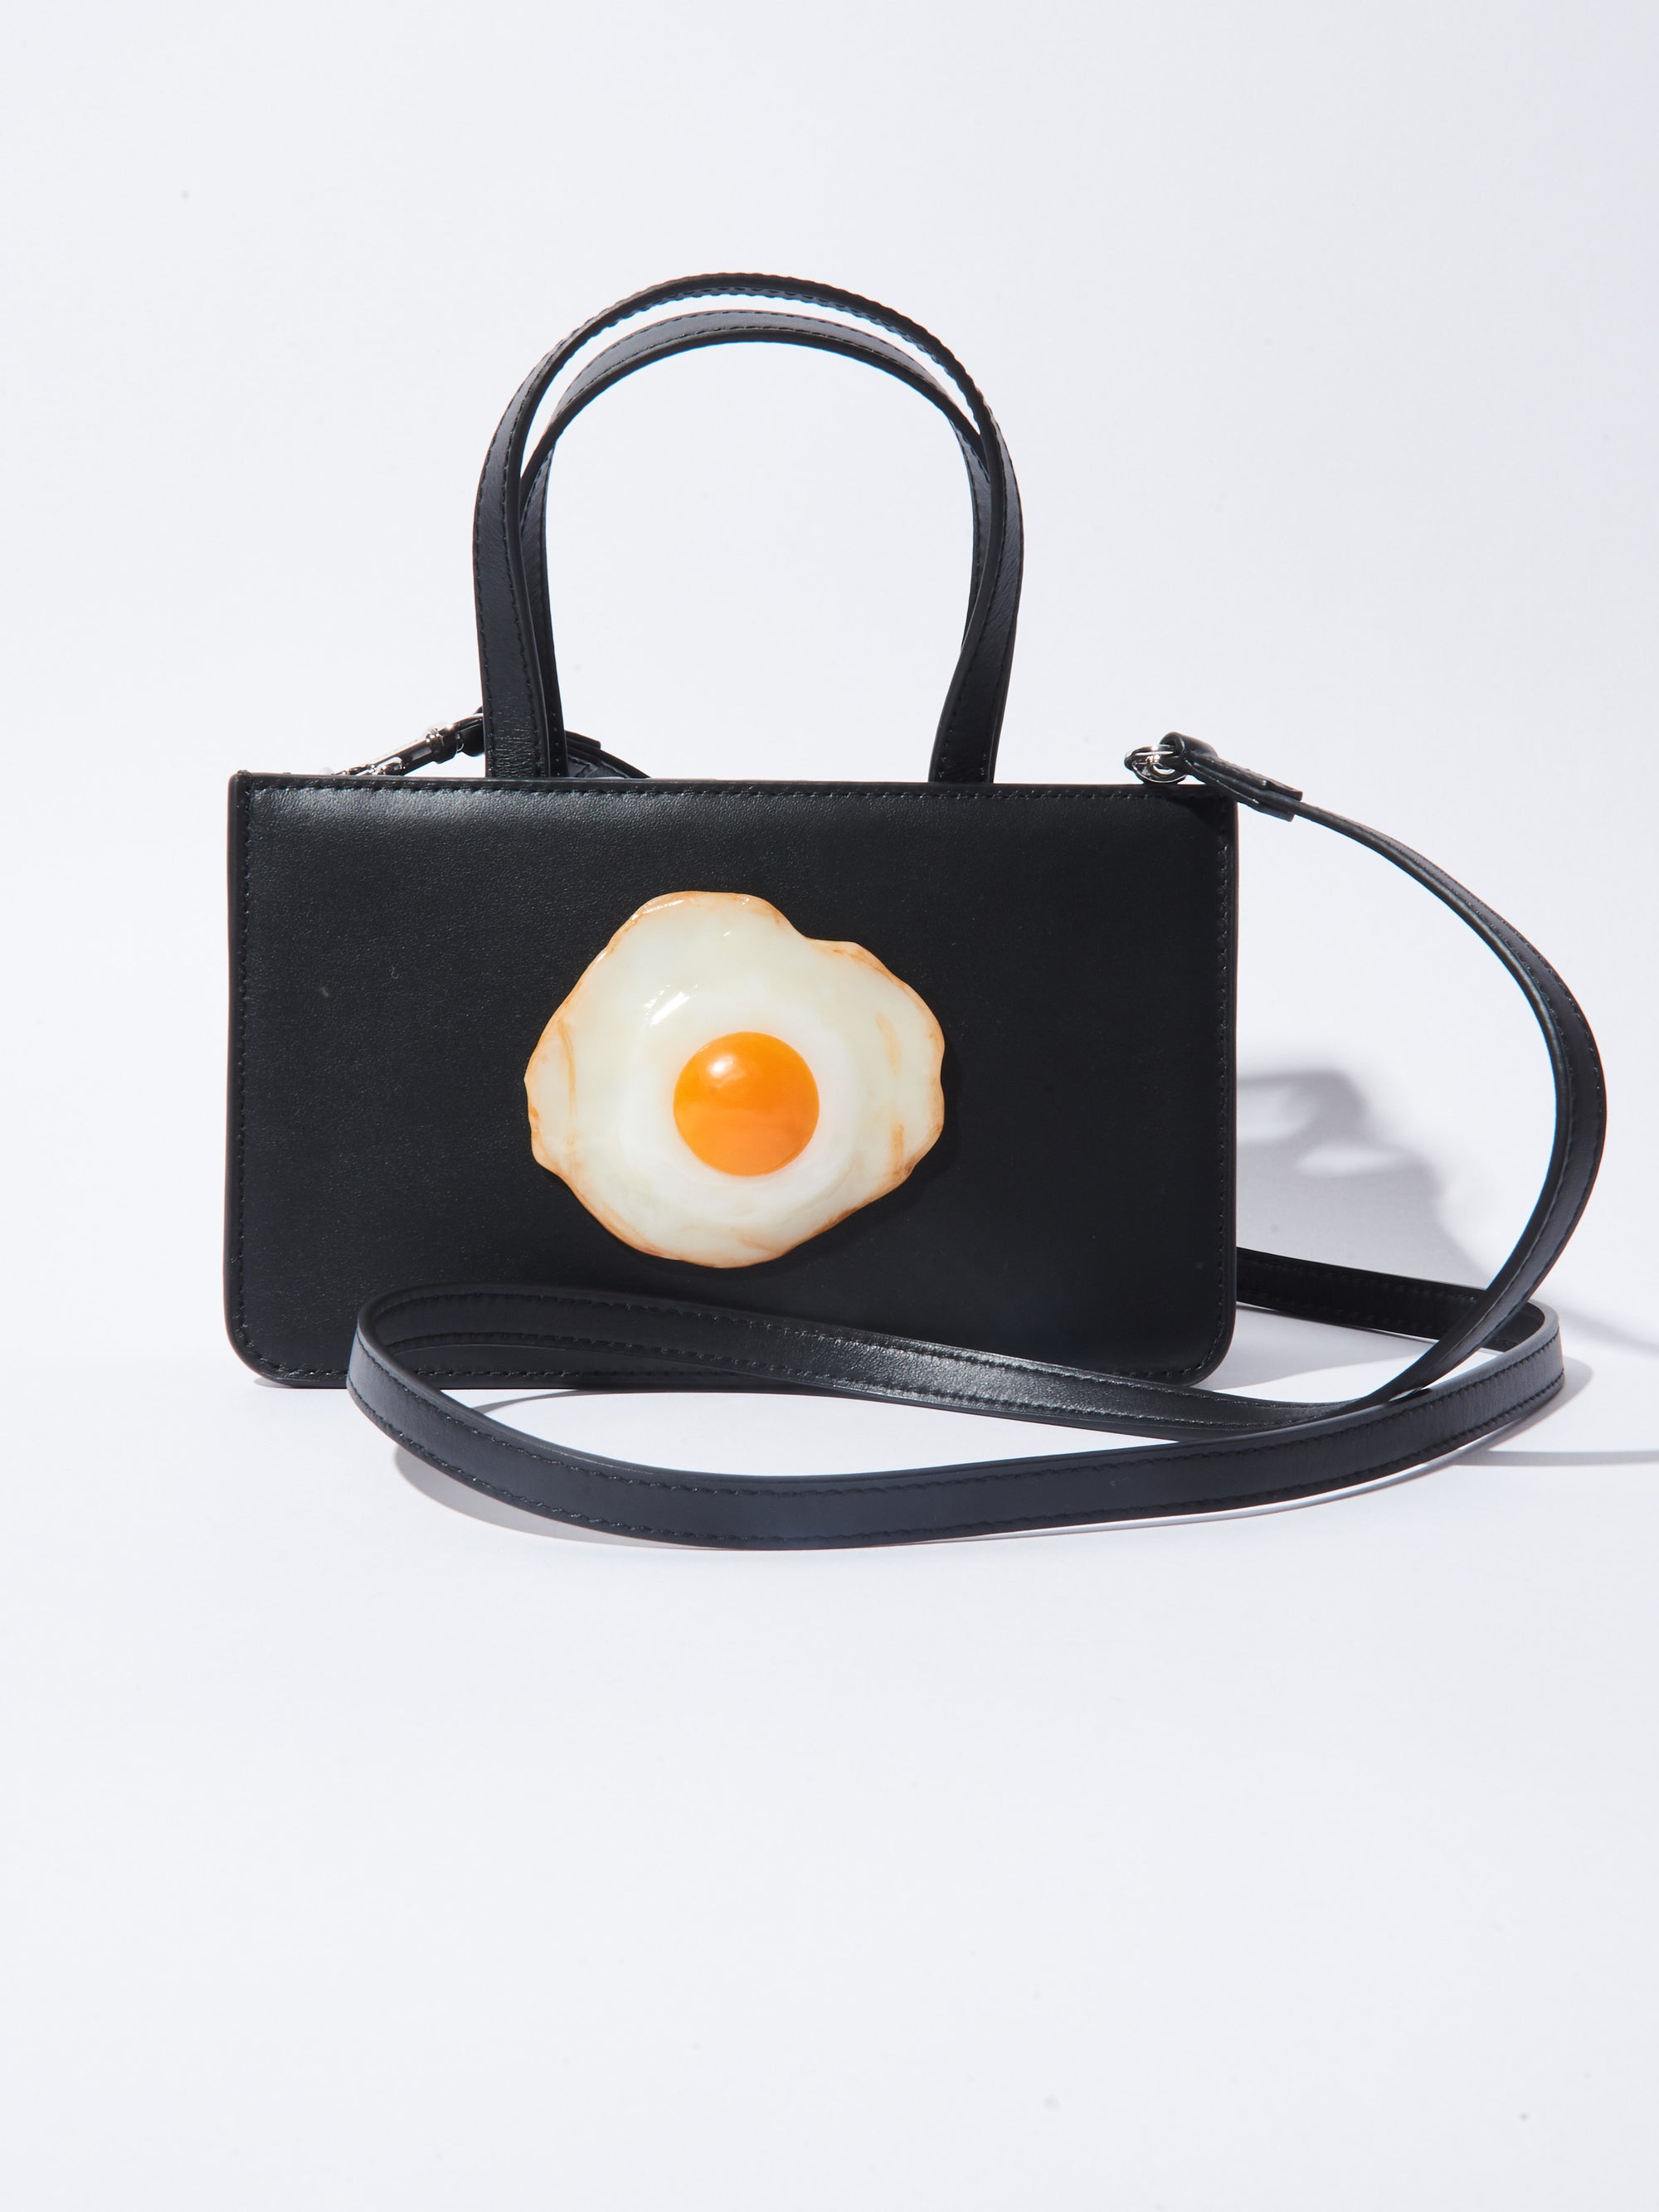 New Amuseable Happy Boiled Egg Bag 12in (30cm) with strap | eBay